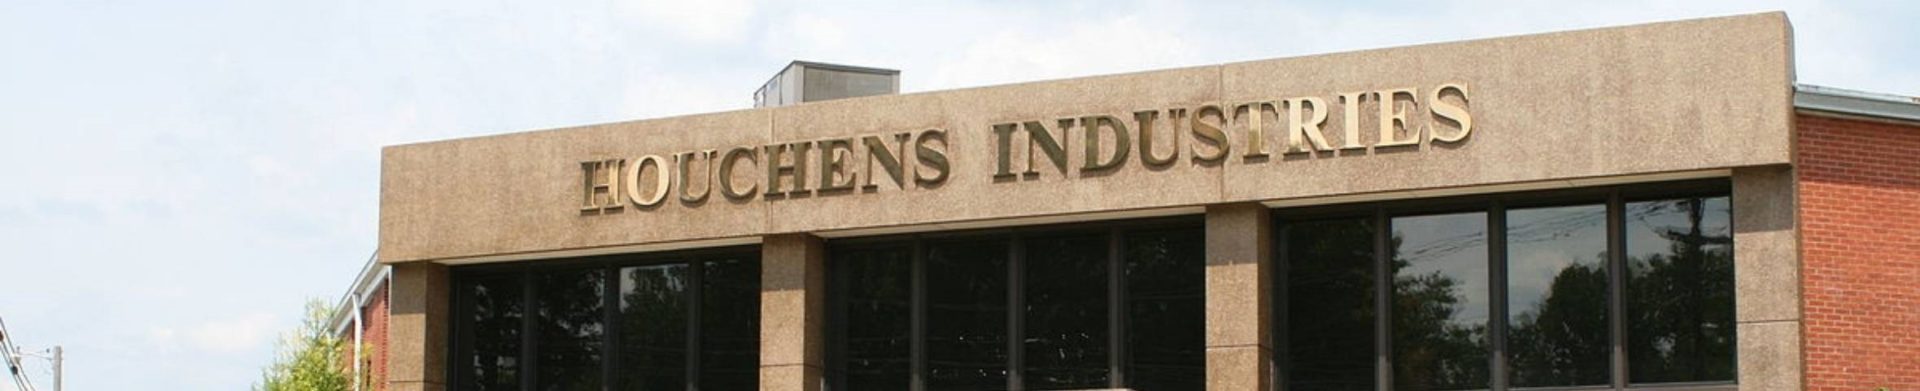 Houchens Industries office in the daytime